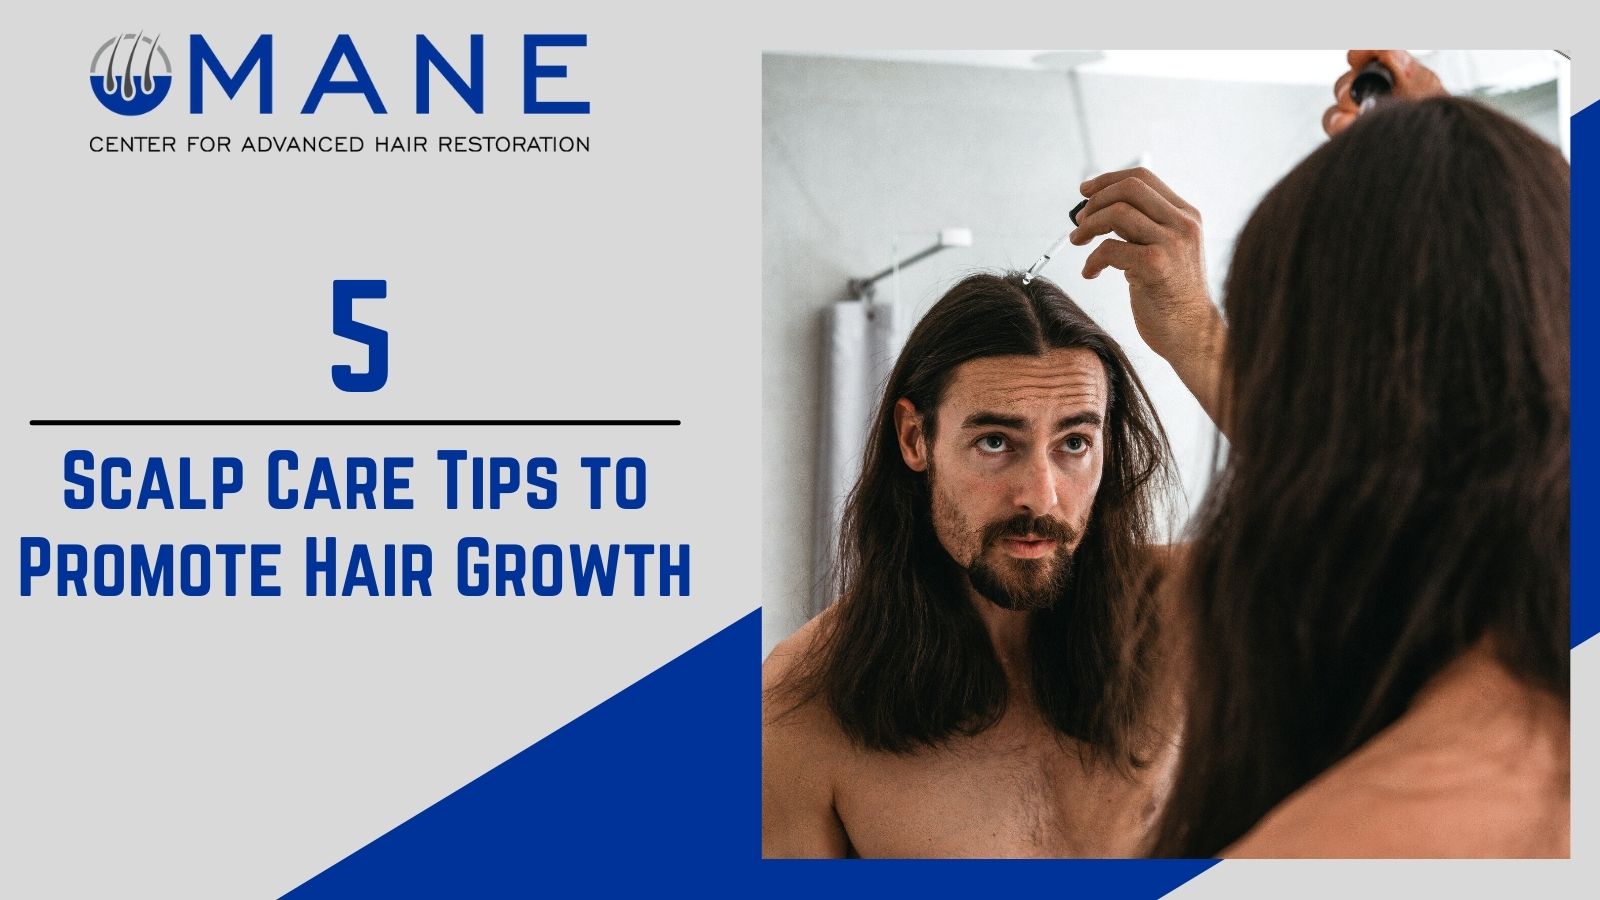 5 Scalp Care Tips to Promote Hair Growth